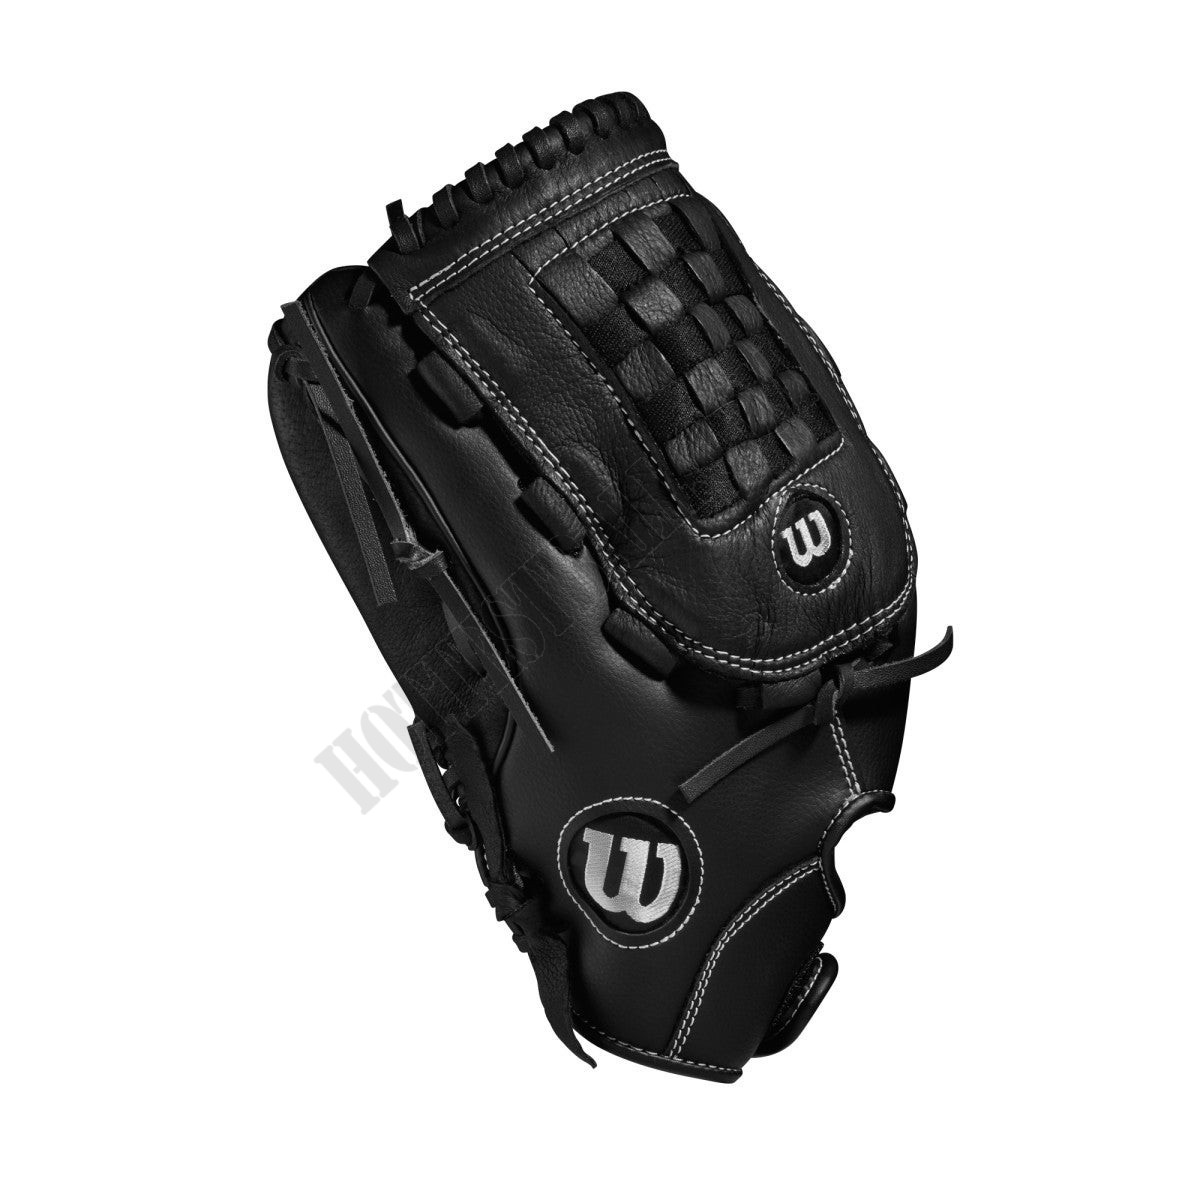 A360 14" Slowpitch Glove - Left Hand Throw ● Wilson Promotions - -7